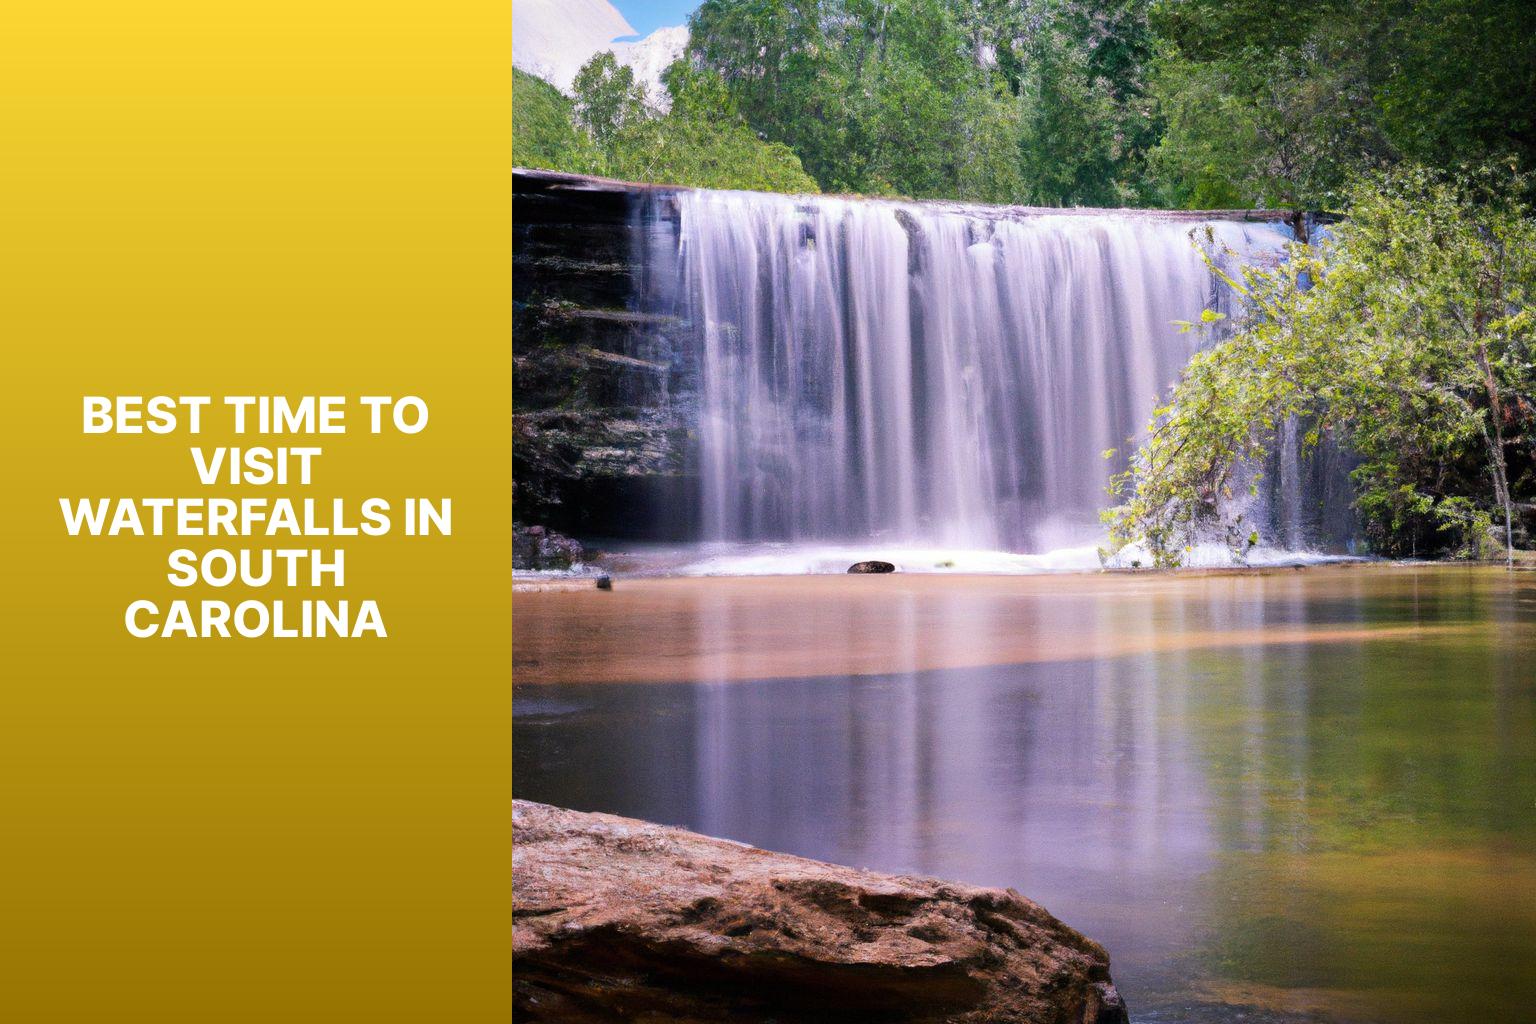 Best Time to Visit Waterfalls in South Carolina - Waterfall Hikes in South Carolina 